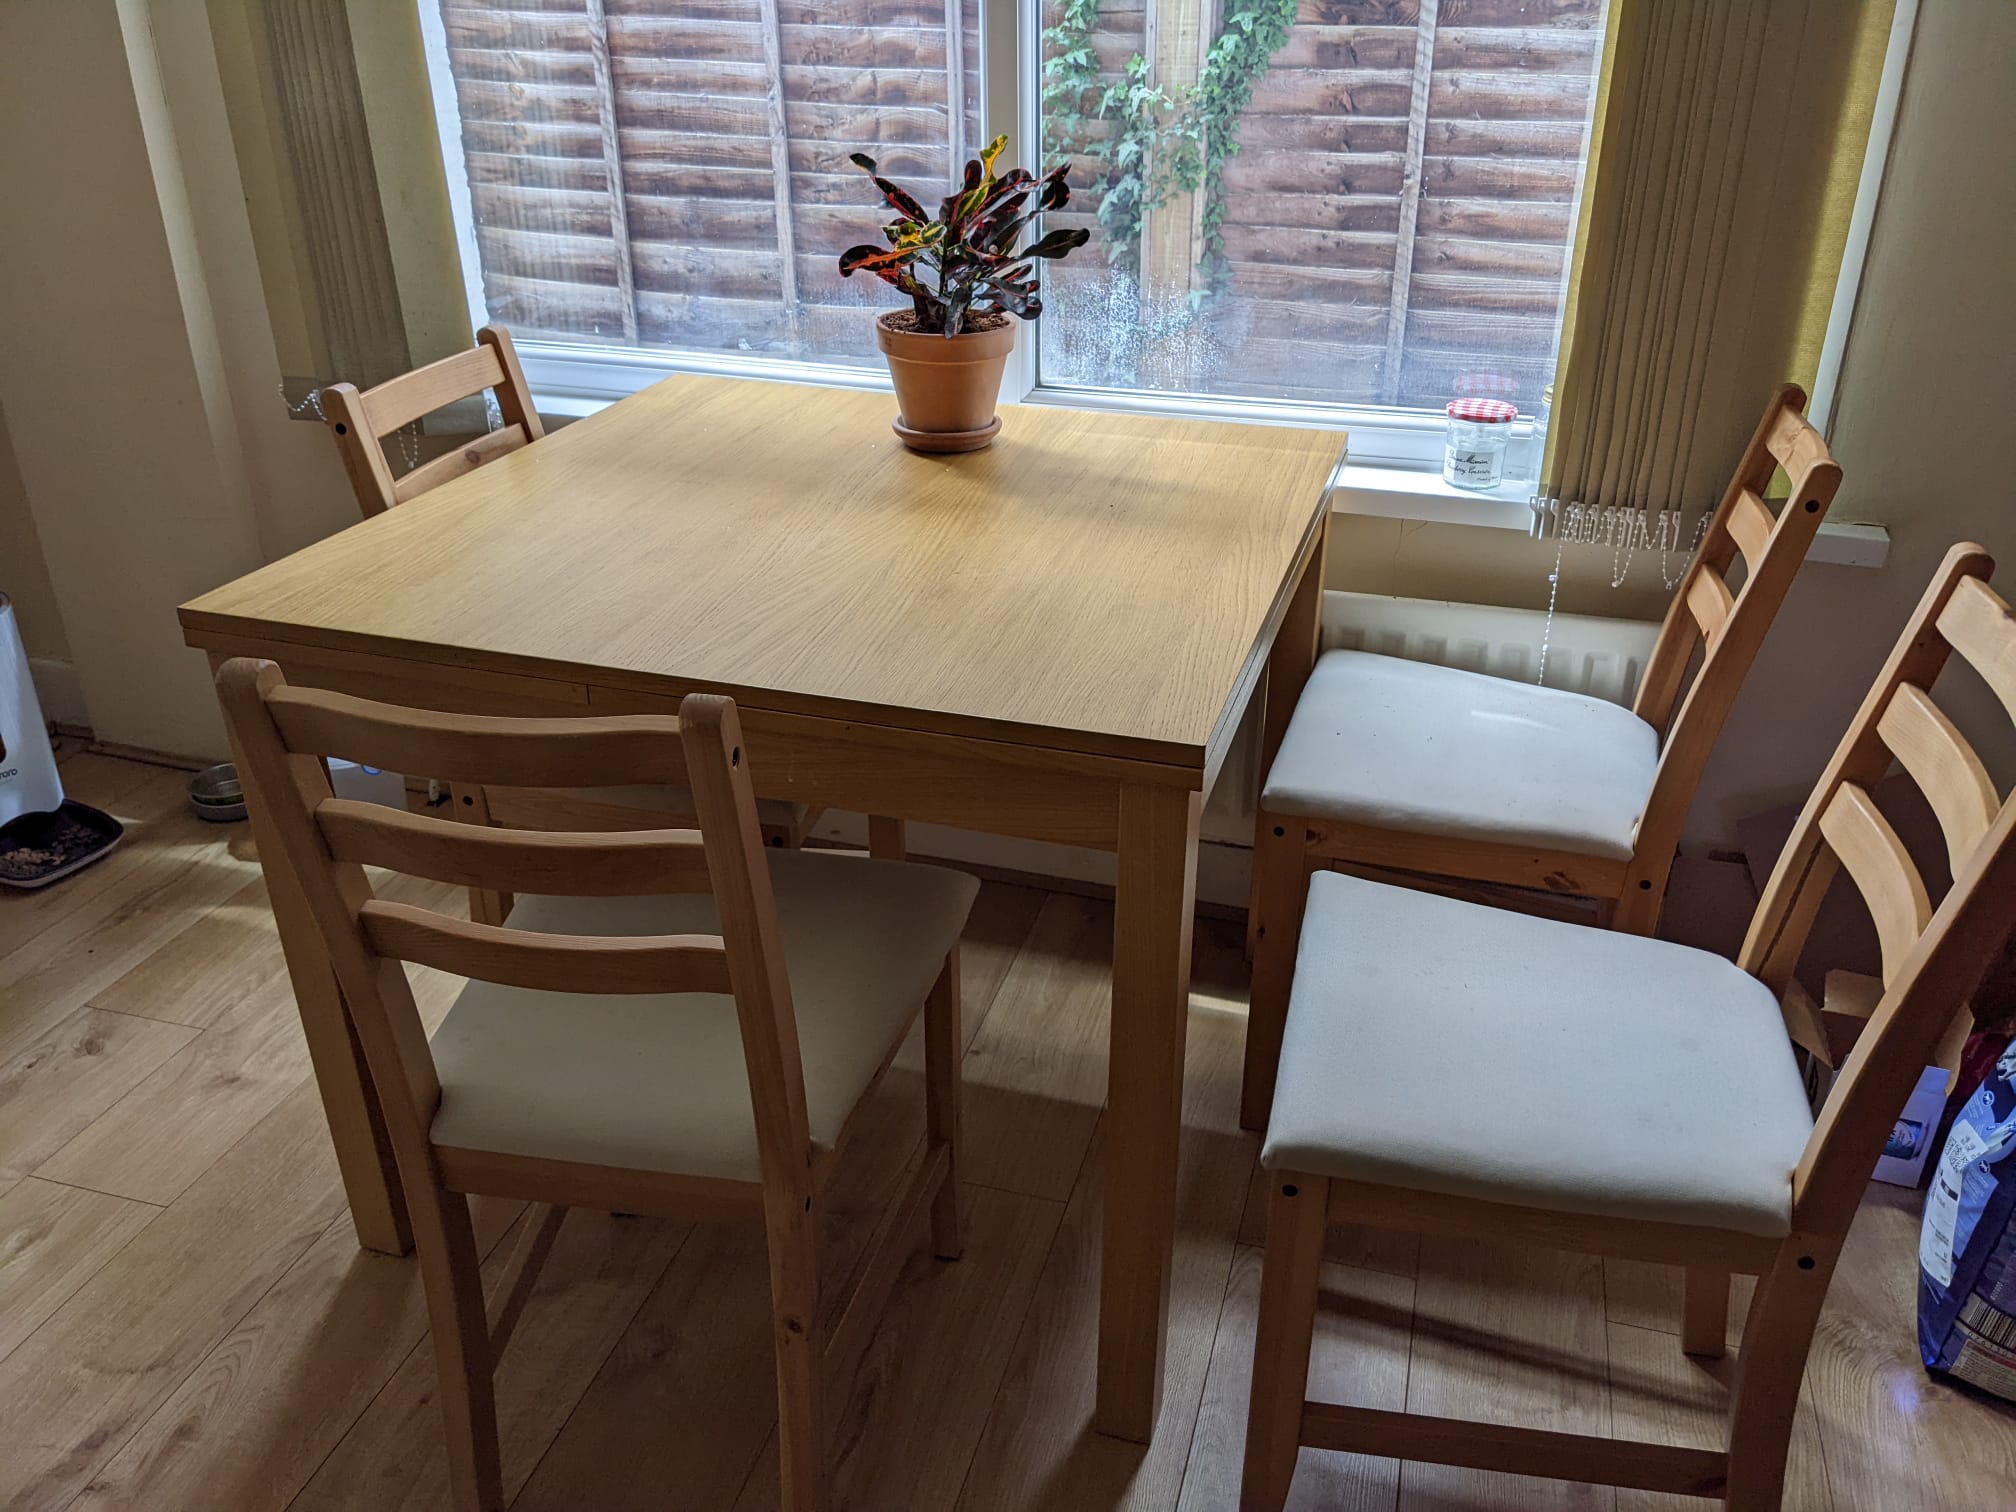 Wood dining table with four chairs